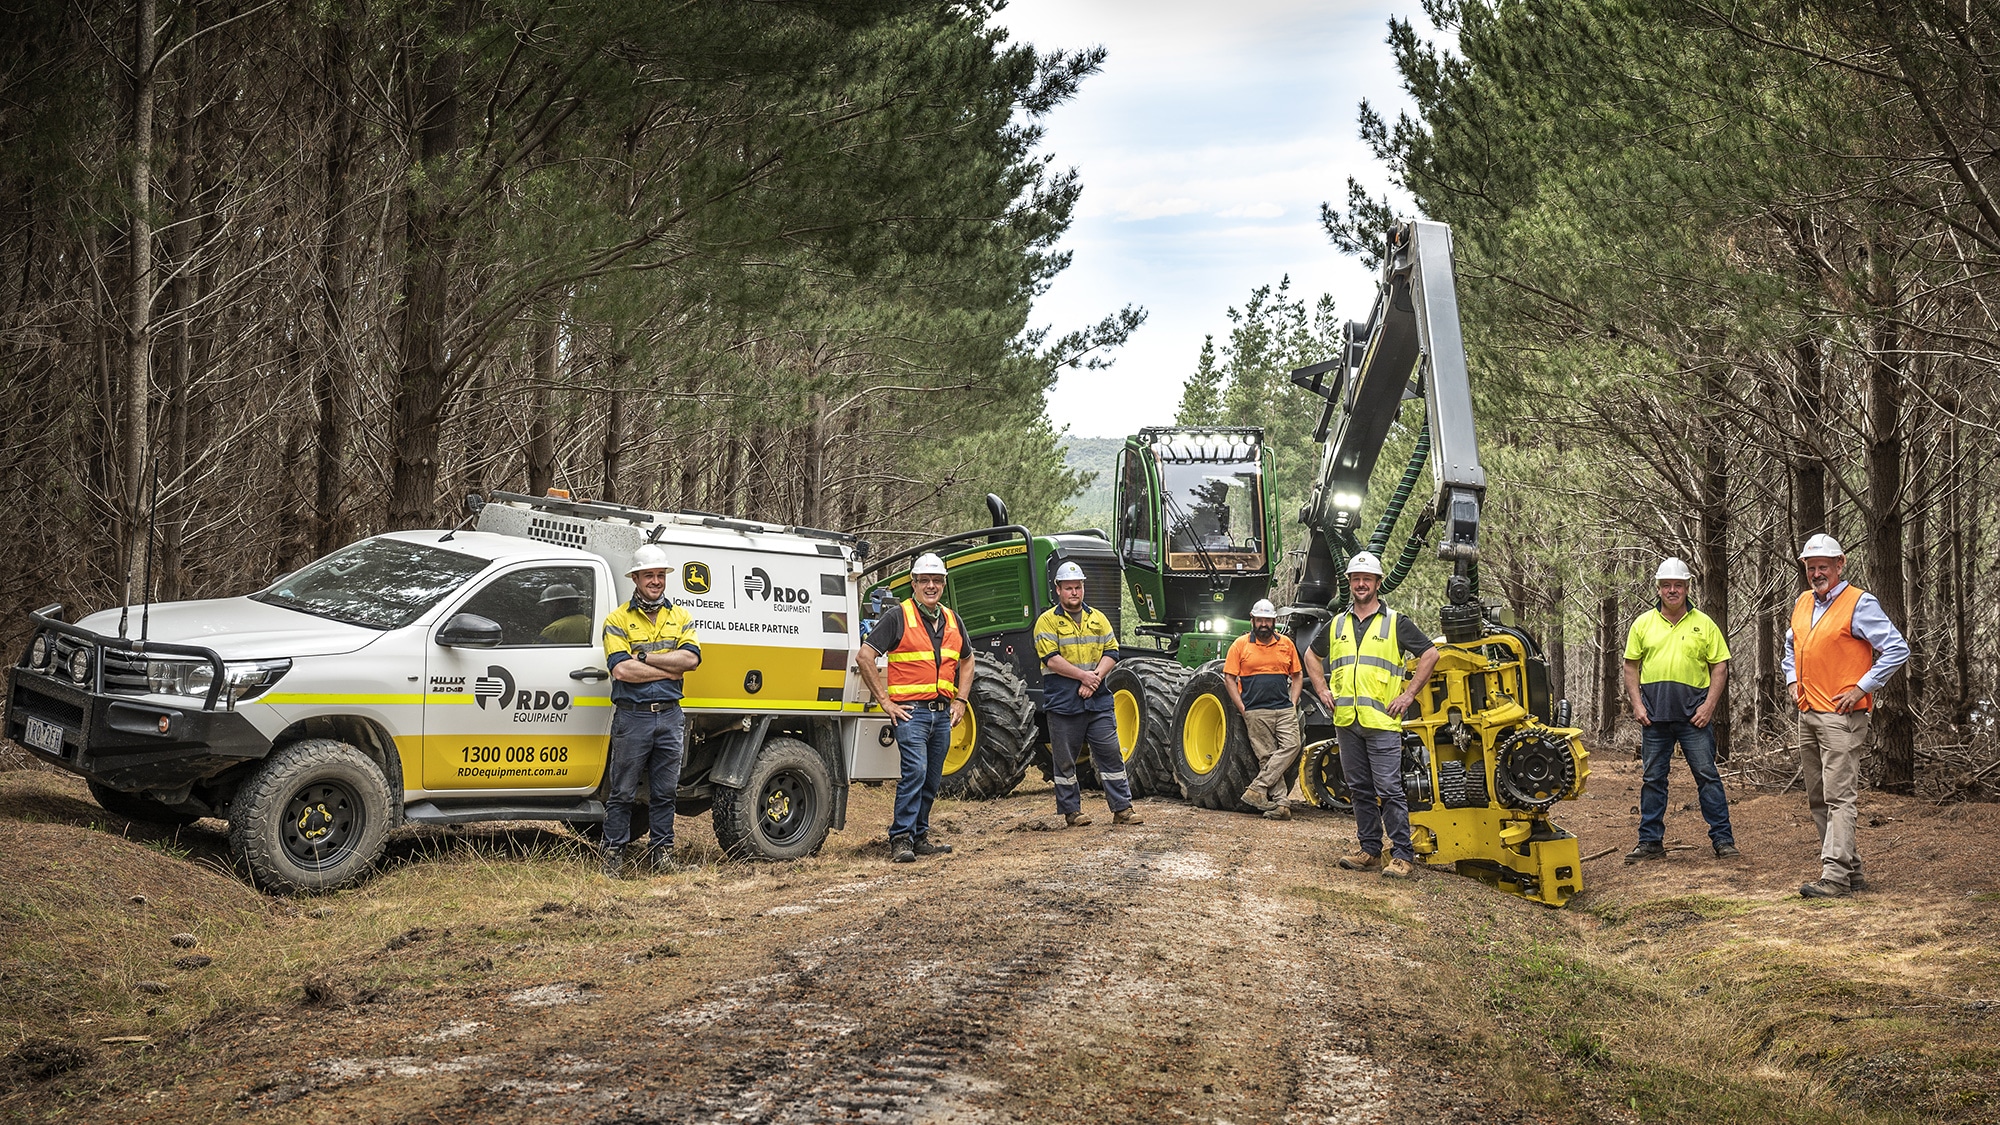 50th John Deere forestry machine sold in Australia sold to Austimber - RDO Equipment